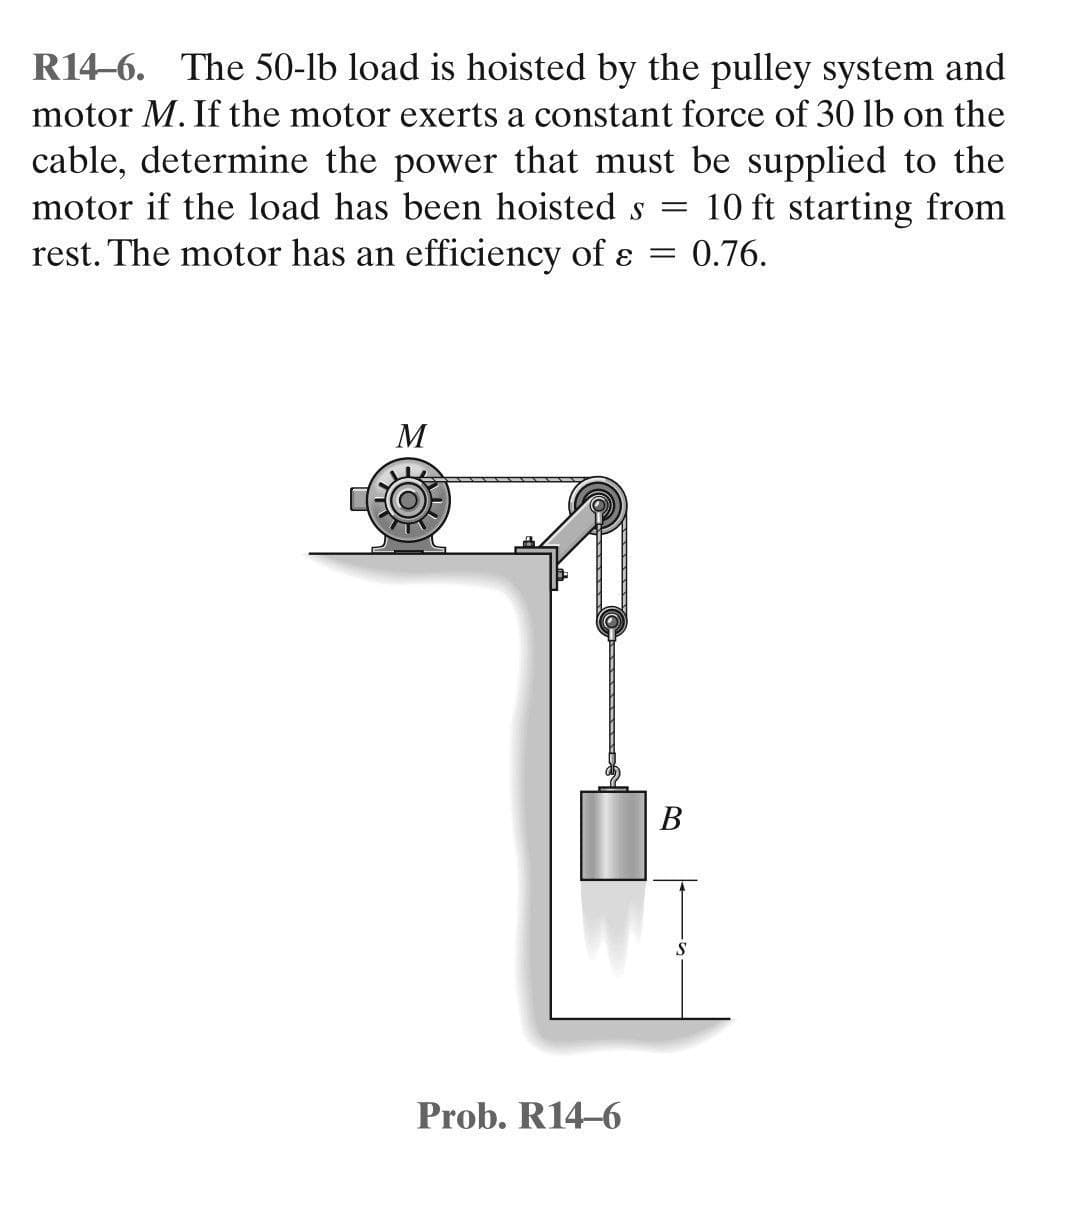 R14-6. The 50-lb load is hoisted by the pulley system and
motor M. If the motor exerts a constant force of 30 lb on the
cable, determine the power that must be supplied to the
motor if the load has been hoisted s = 10 ft starting from
rest. The motor has an efficiency of e : 0.76.
=
M
Prob. R14-6
B